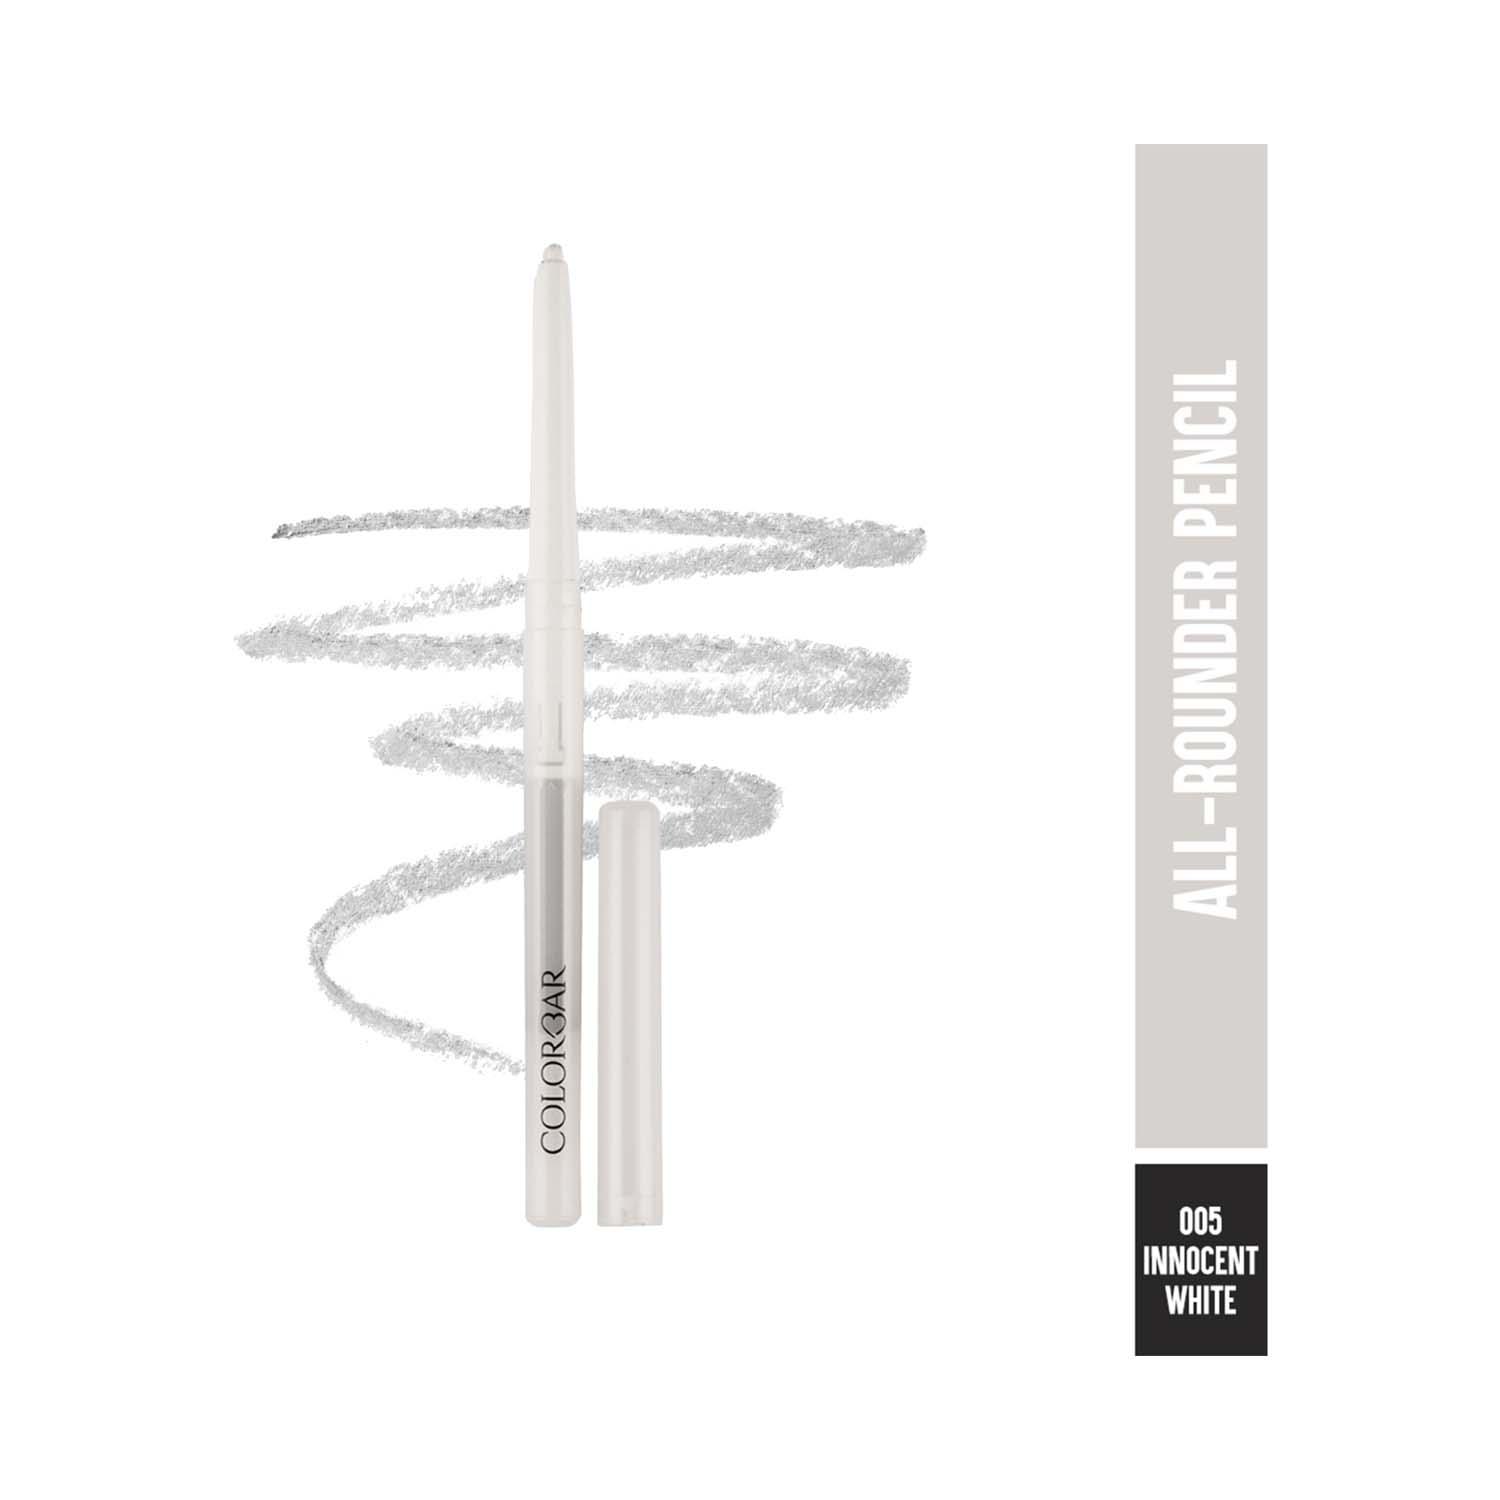 Colorbar | Colorbar All-Rounder Pencil Innocent - White - [005] (0.29 g)